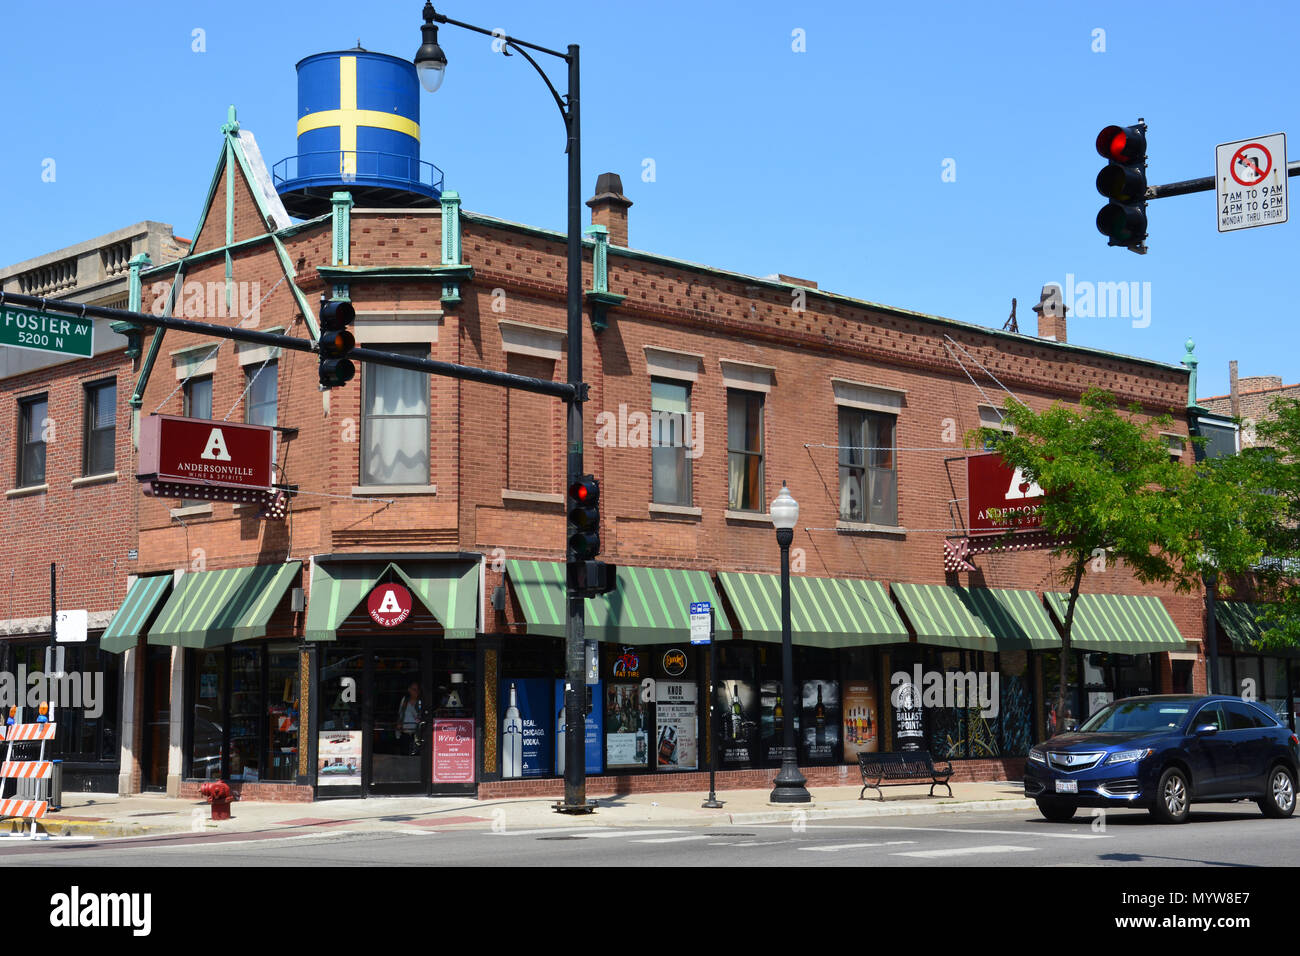 Andersonville Chicago High Resolution Stock Photography and Images - Alamy